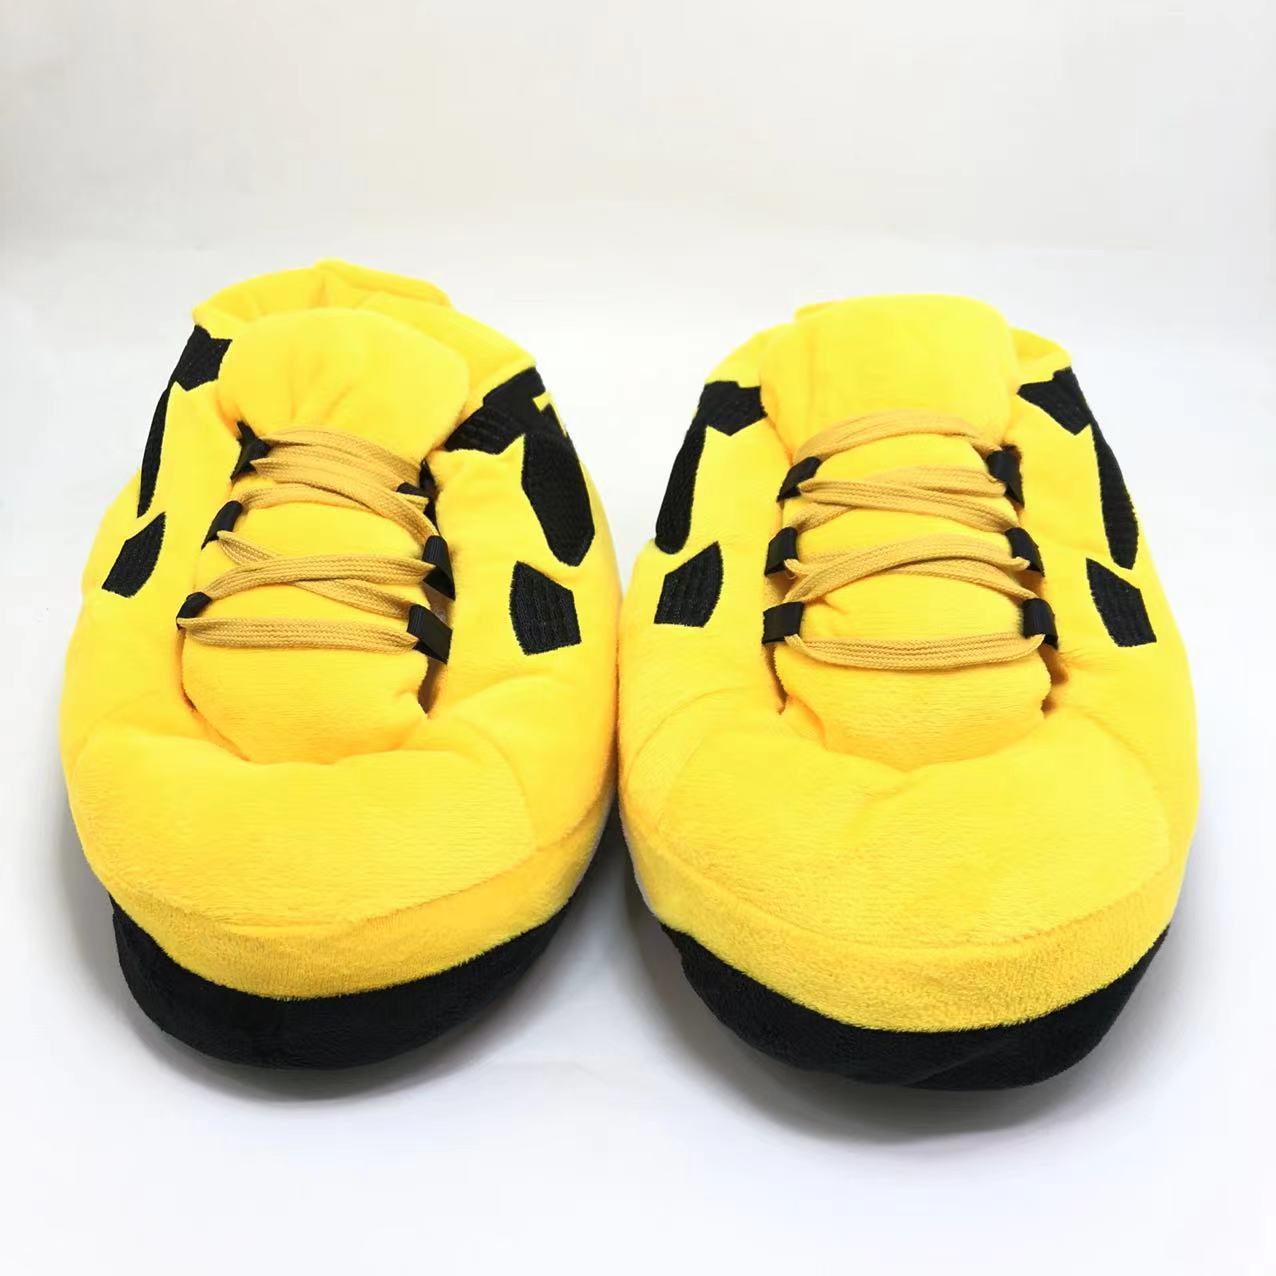 Slip Kickz  Slippers One Size Fits All ( UK 3 - 10.5 ) / Yellow Yellow A4 Sneaker Slippers